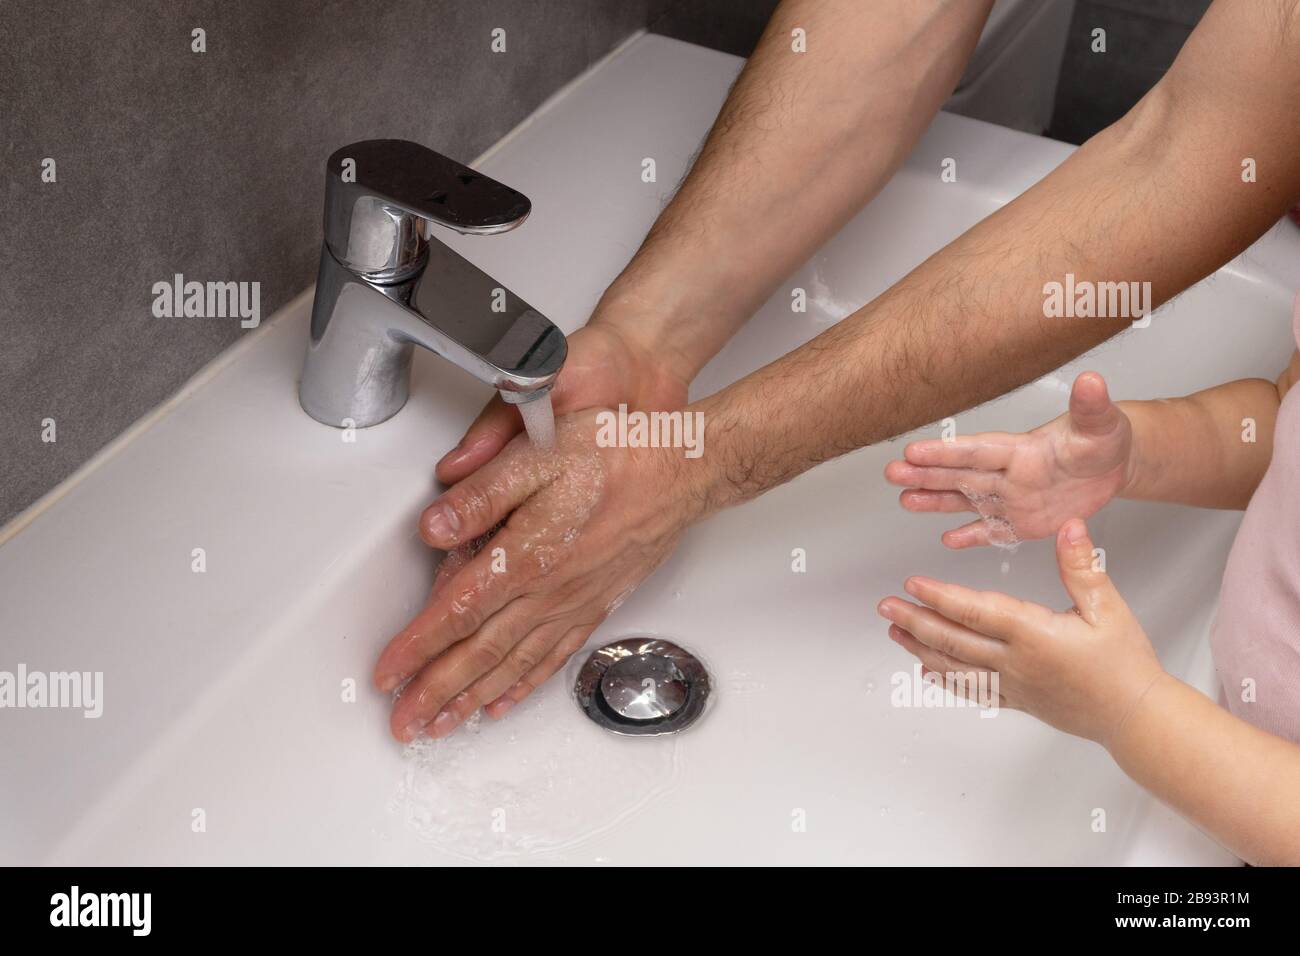 Father teaches his child how to wash hands correctly Stock Photo